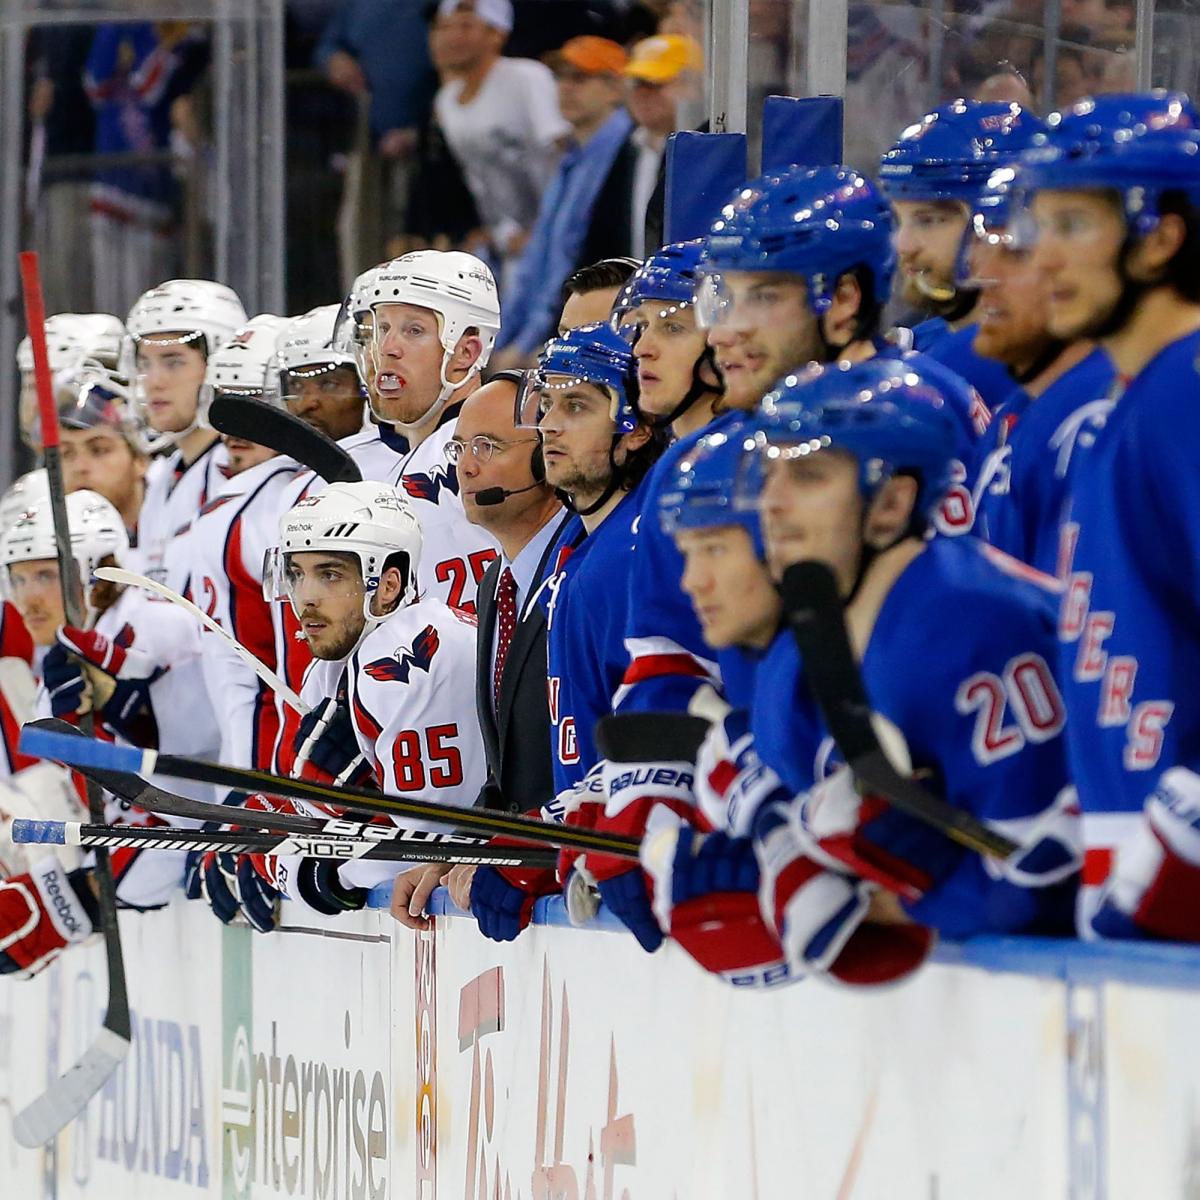 Rangers vs Capitals Game 7 Biggest Key to Victory for Both Teams